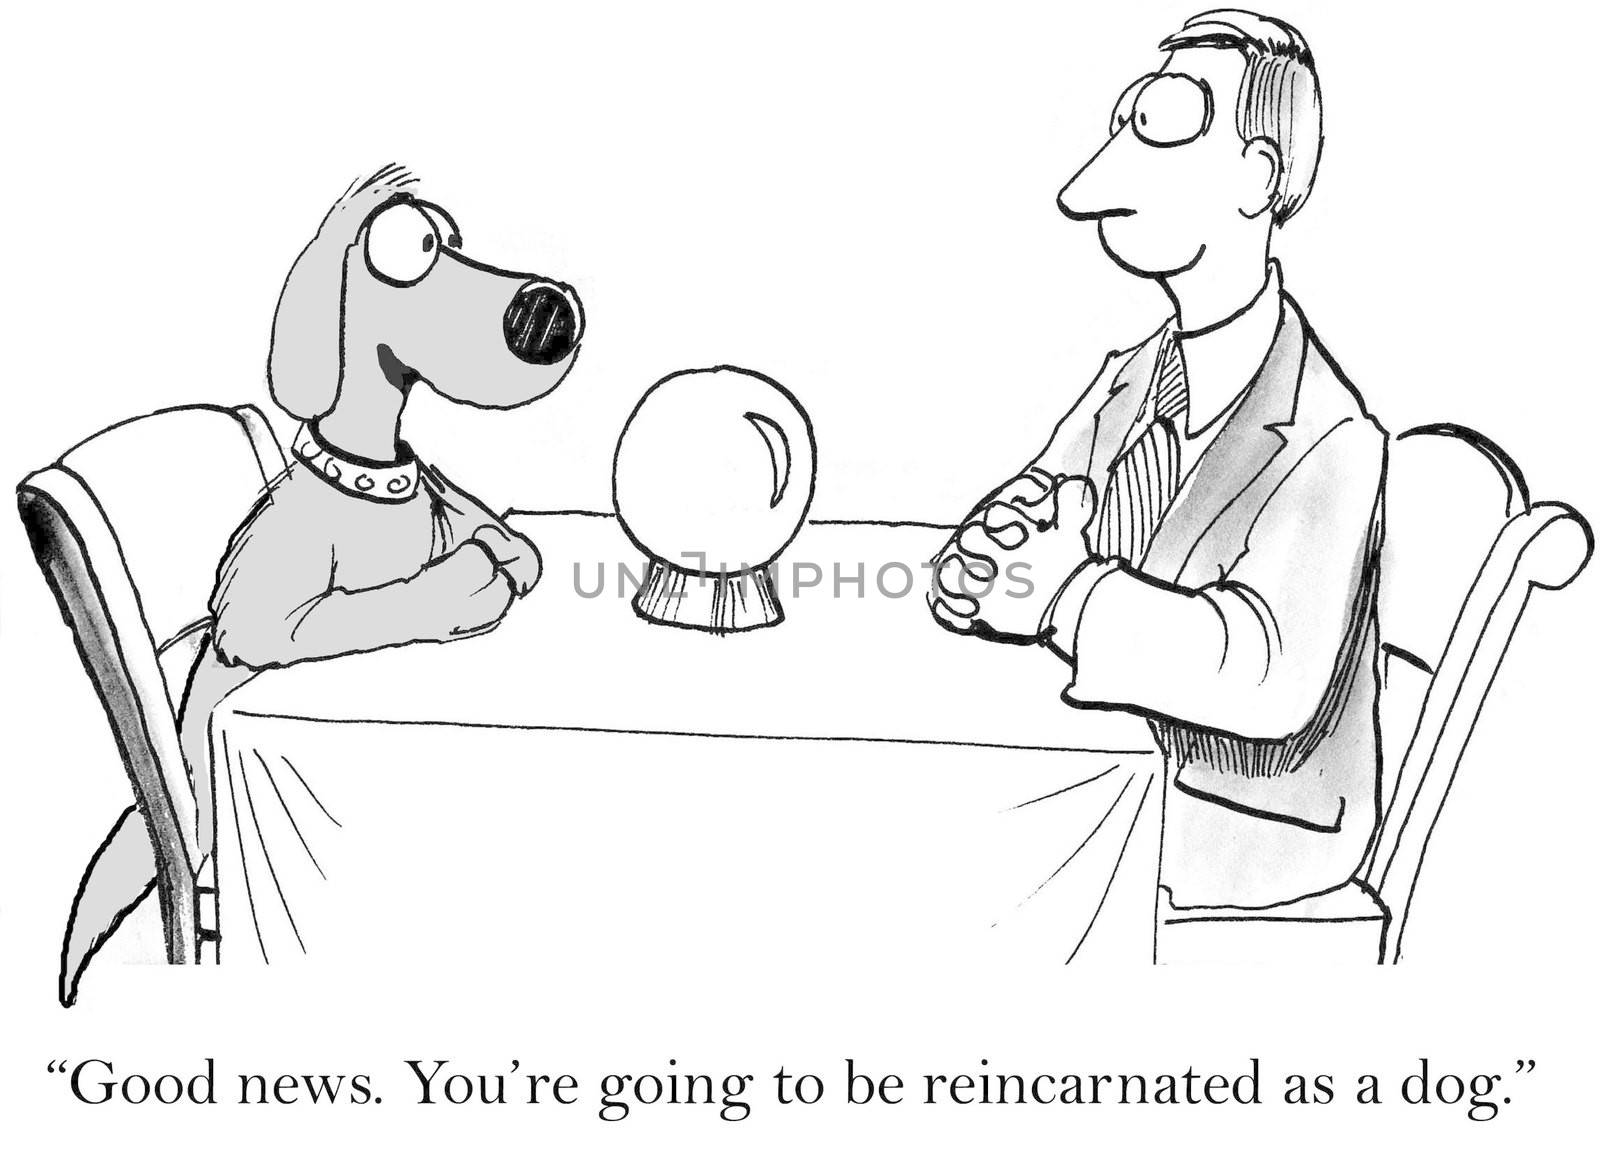 "Good news. You are going to be reincarnated as a dog."